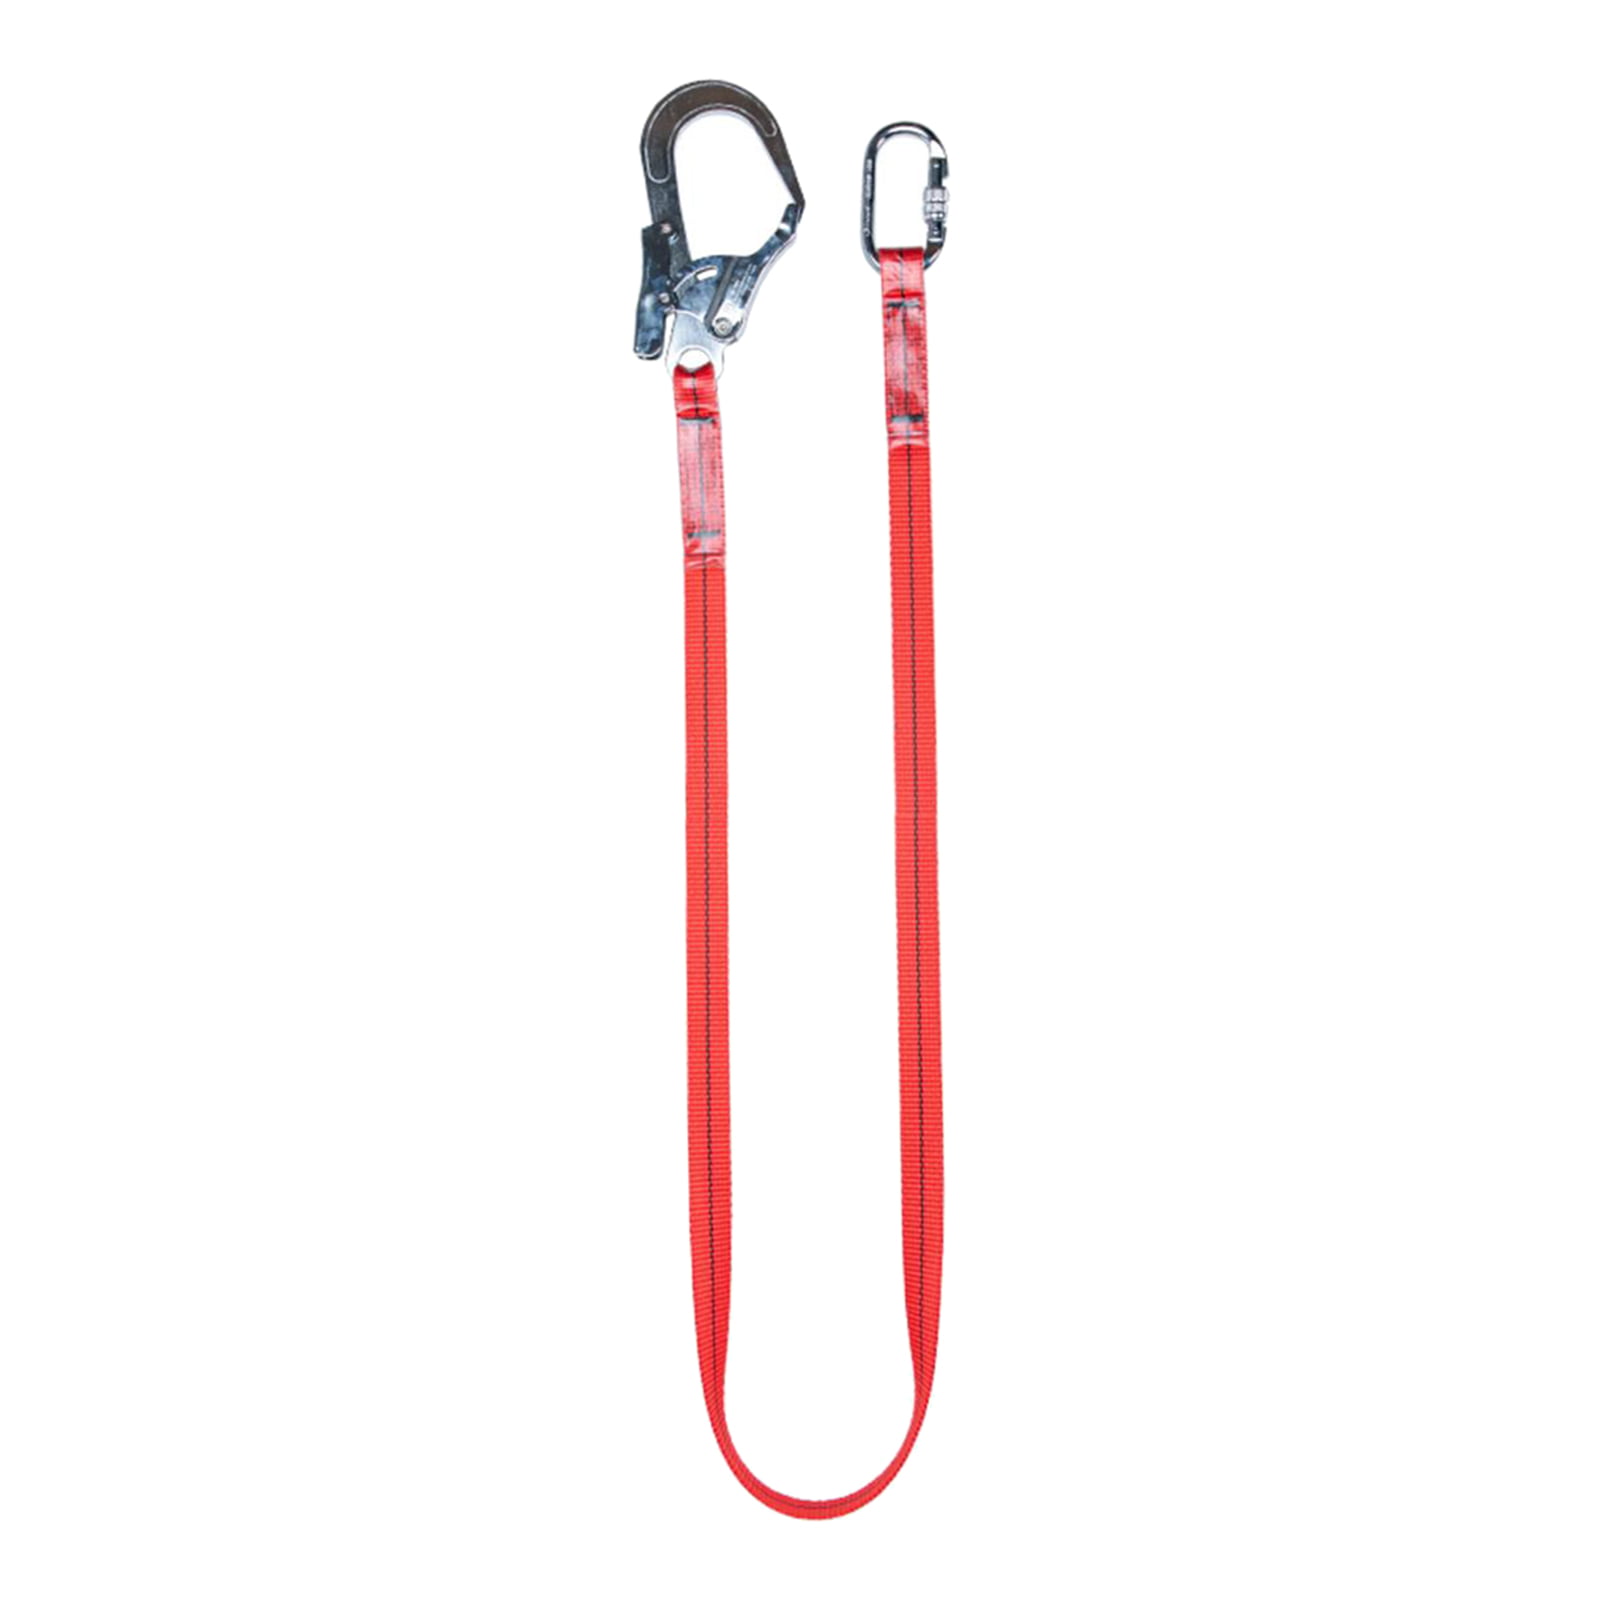 Flameer Swing Tree Strap Belt Holds 5000 lbs with Heavy Duty D-Ring Climbing Fall Protective Safety Harness